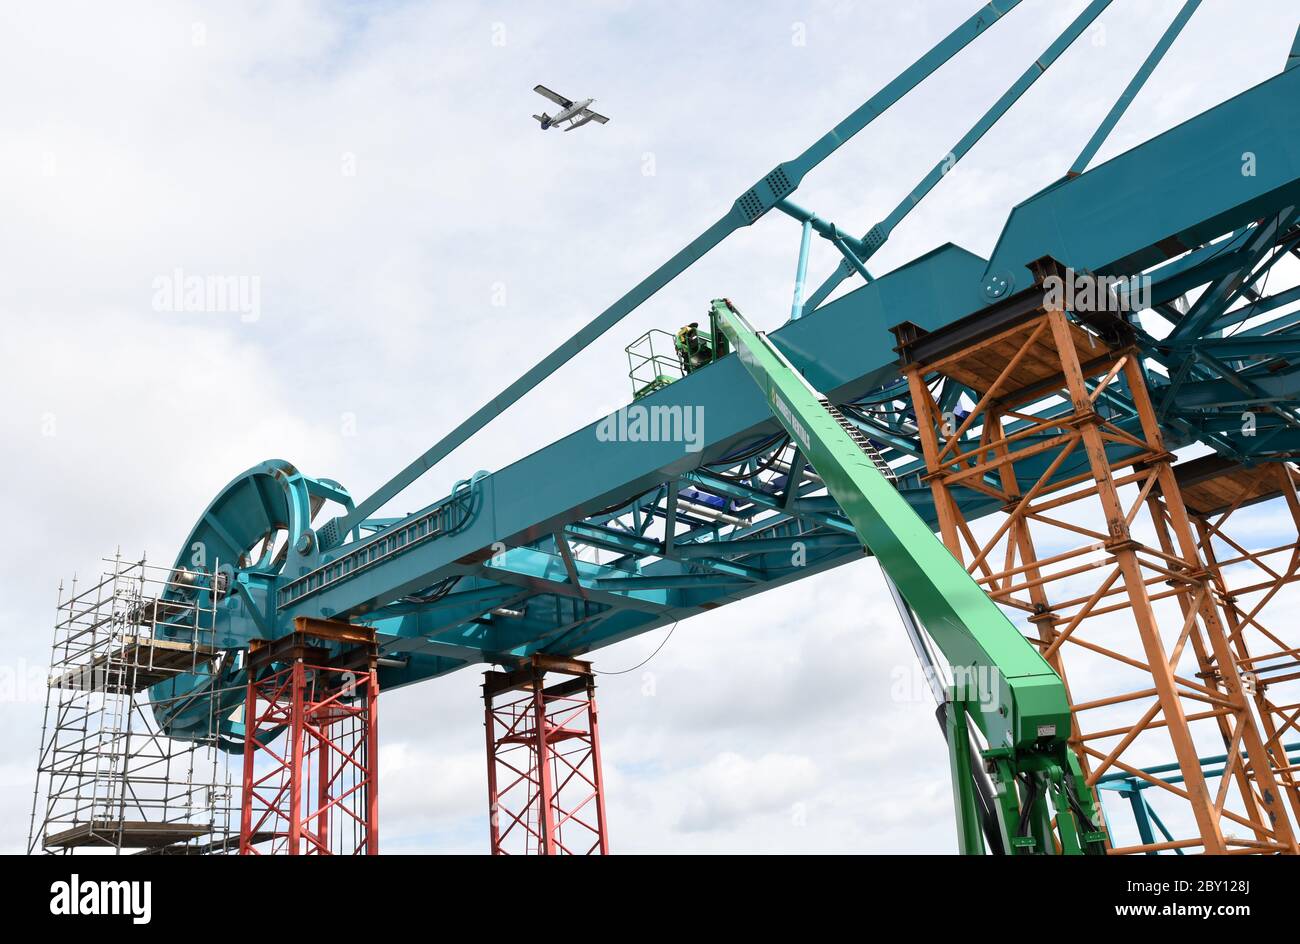 A large stacker-reclaimer takes shape at the Ralmax Group's United Engineering site on the upper harbour in Victoria, British Columbia, Canada on Vanc Stock Photo